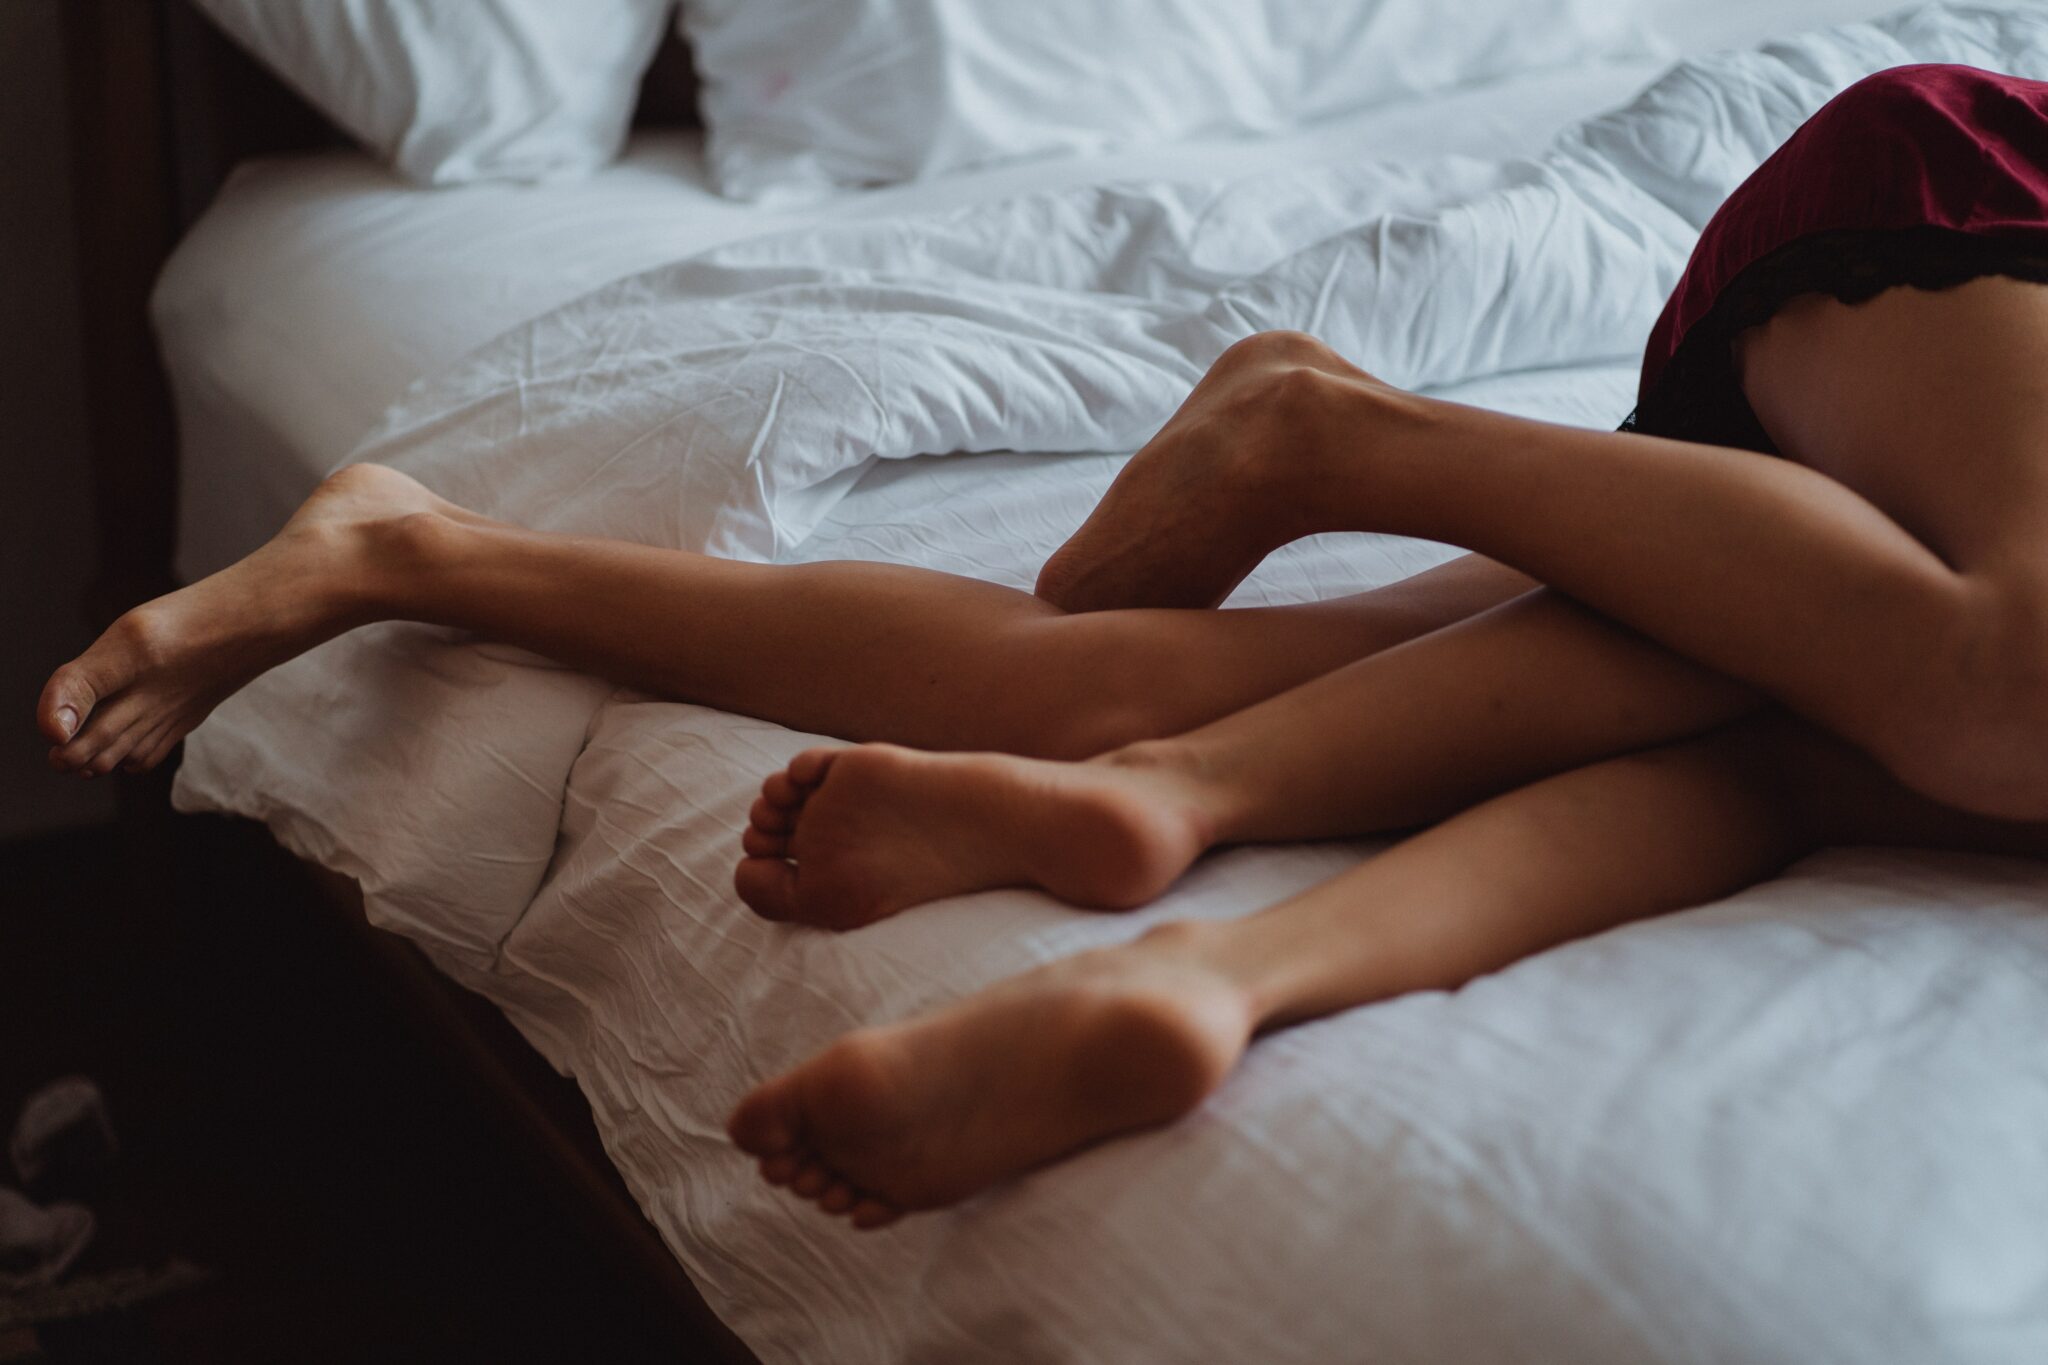 Two women cuddling on a bed with their legs intertwined.